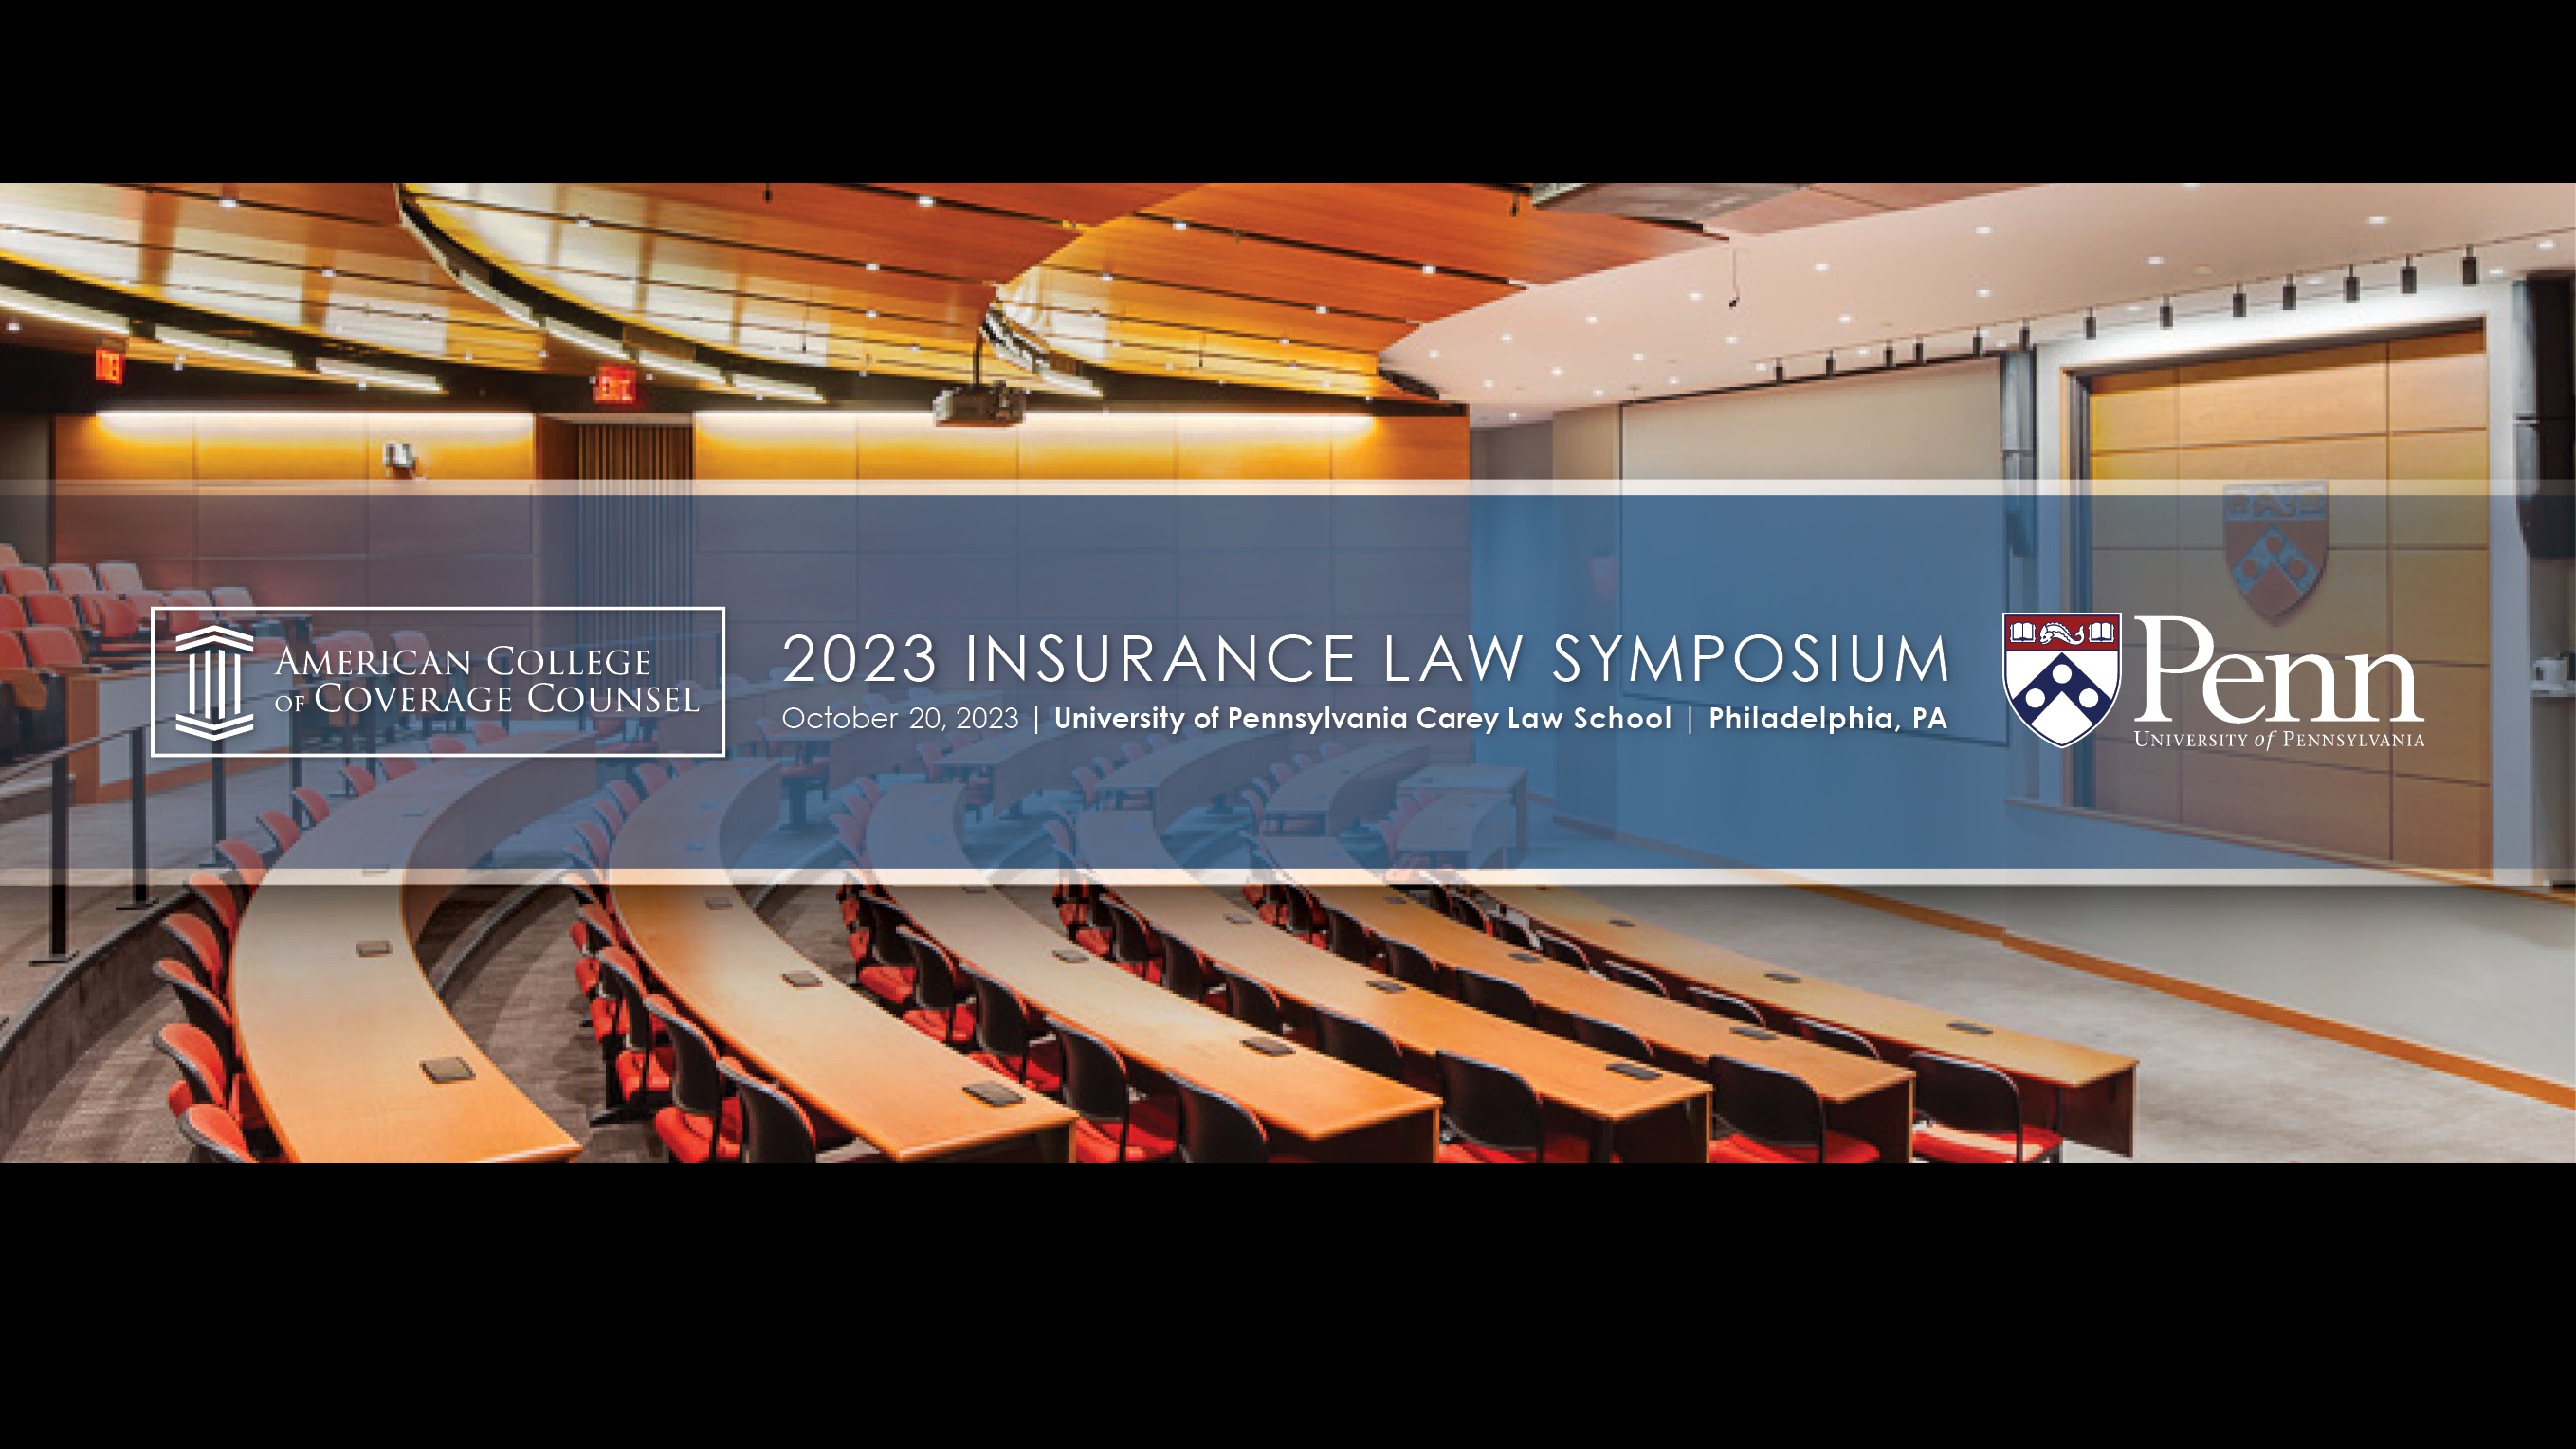 ACCC 9th Annual Insurance Law Symposium Image